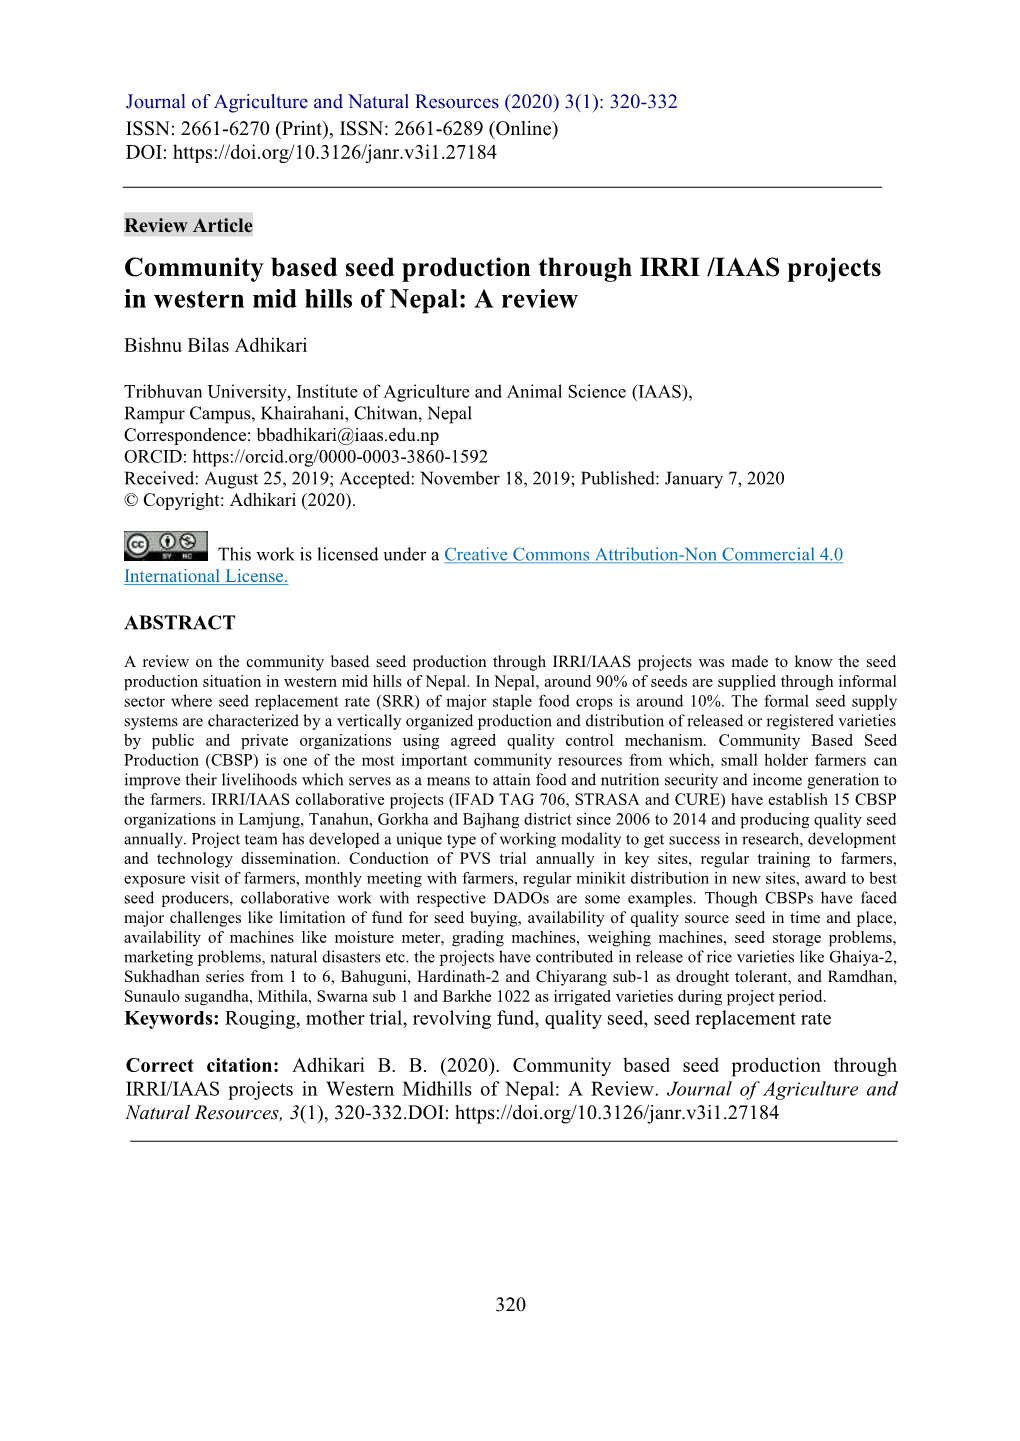 Community Based Seed Production Through IRRI /IAAS Projects in Western Mid Hills of Nepal: a Review